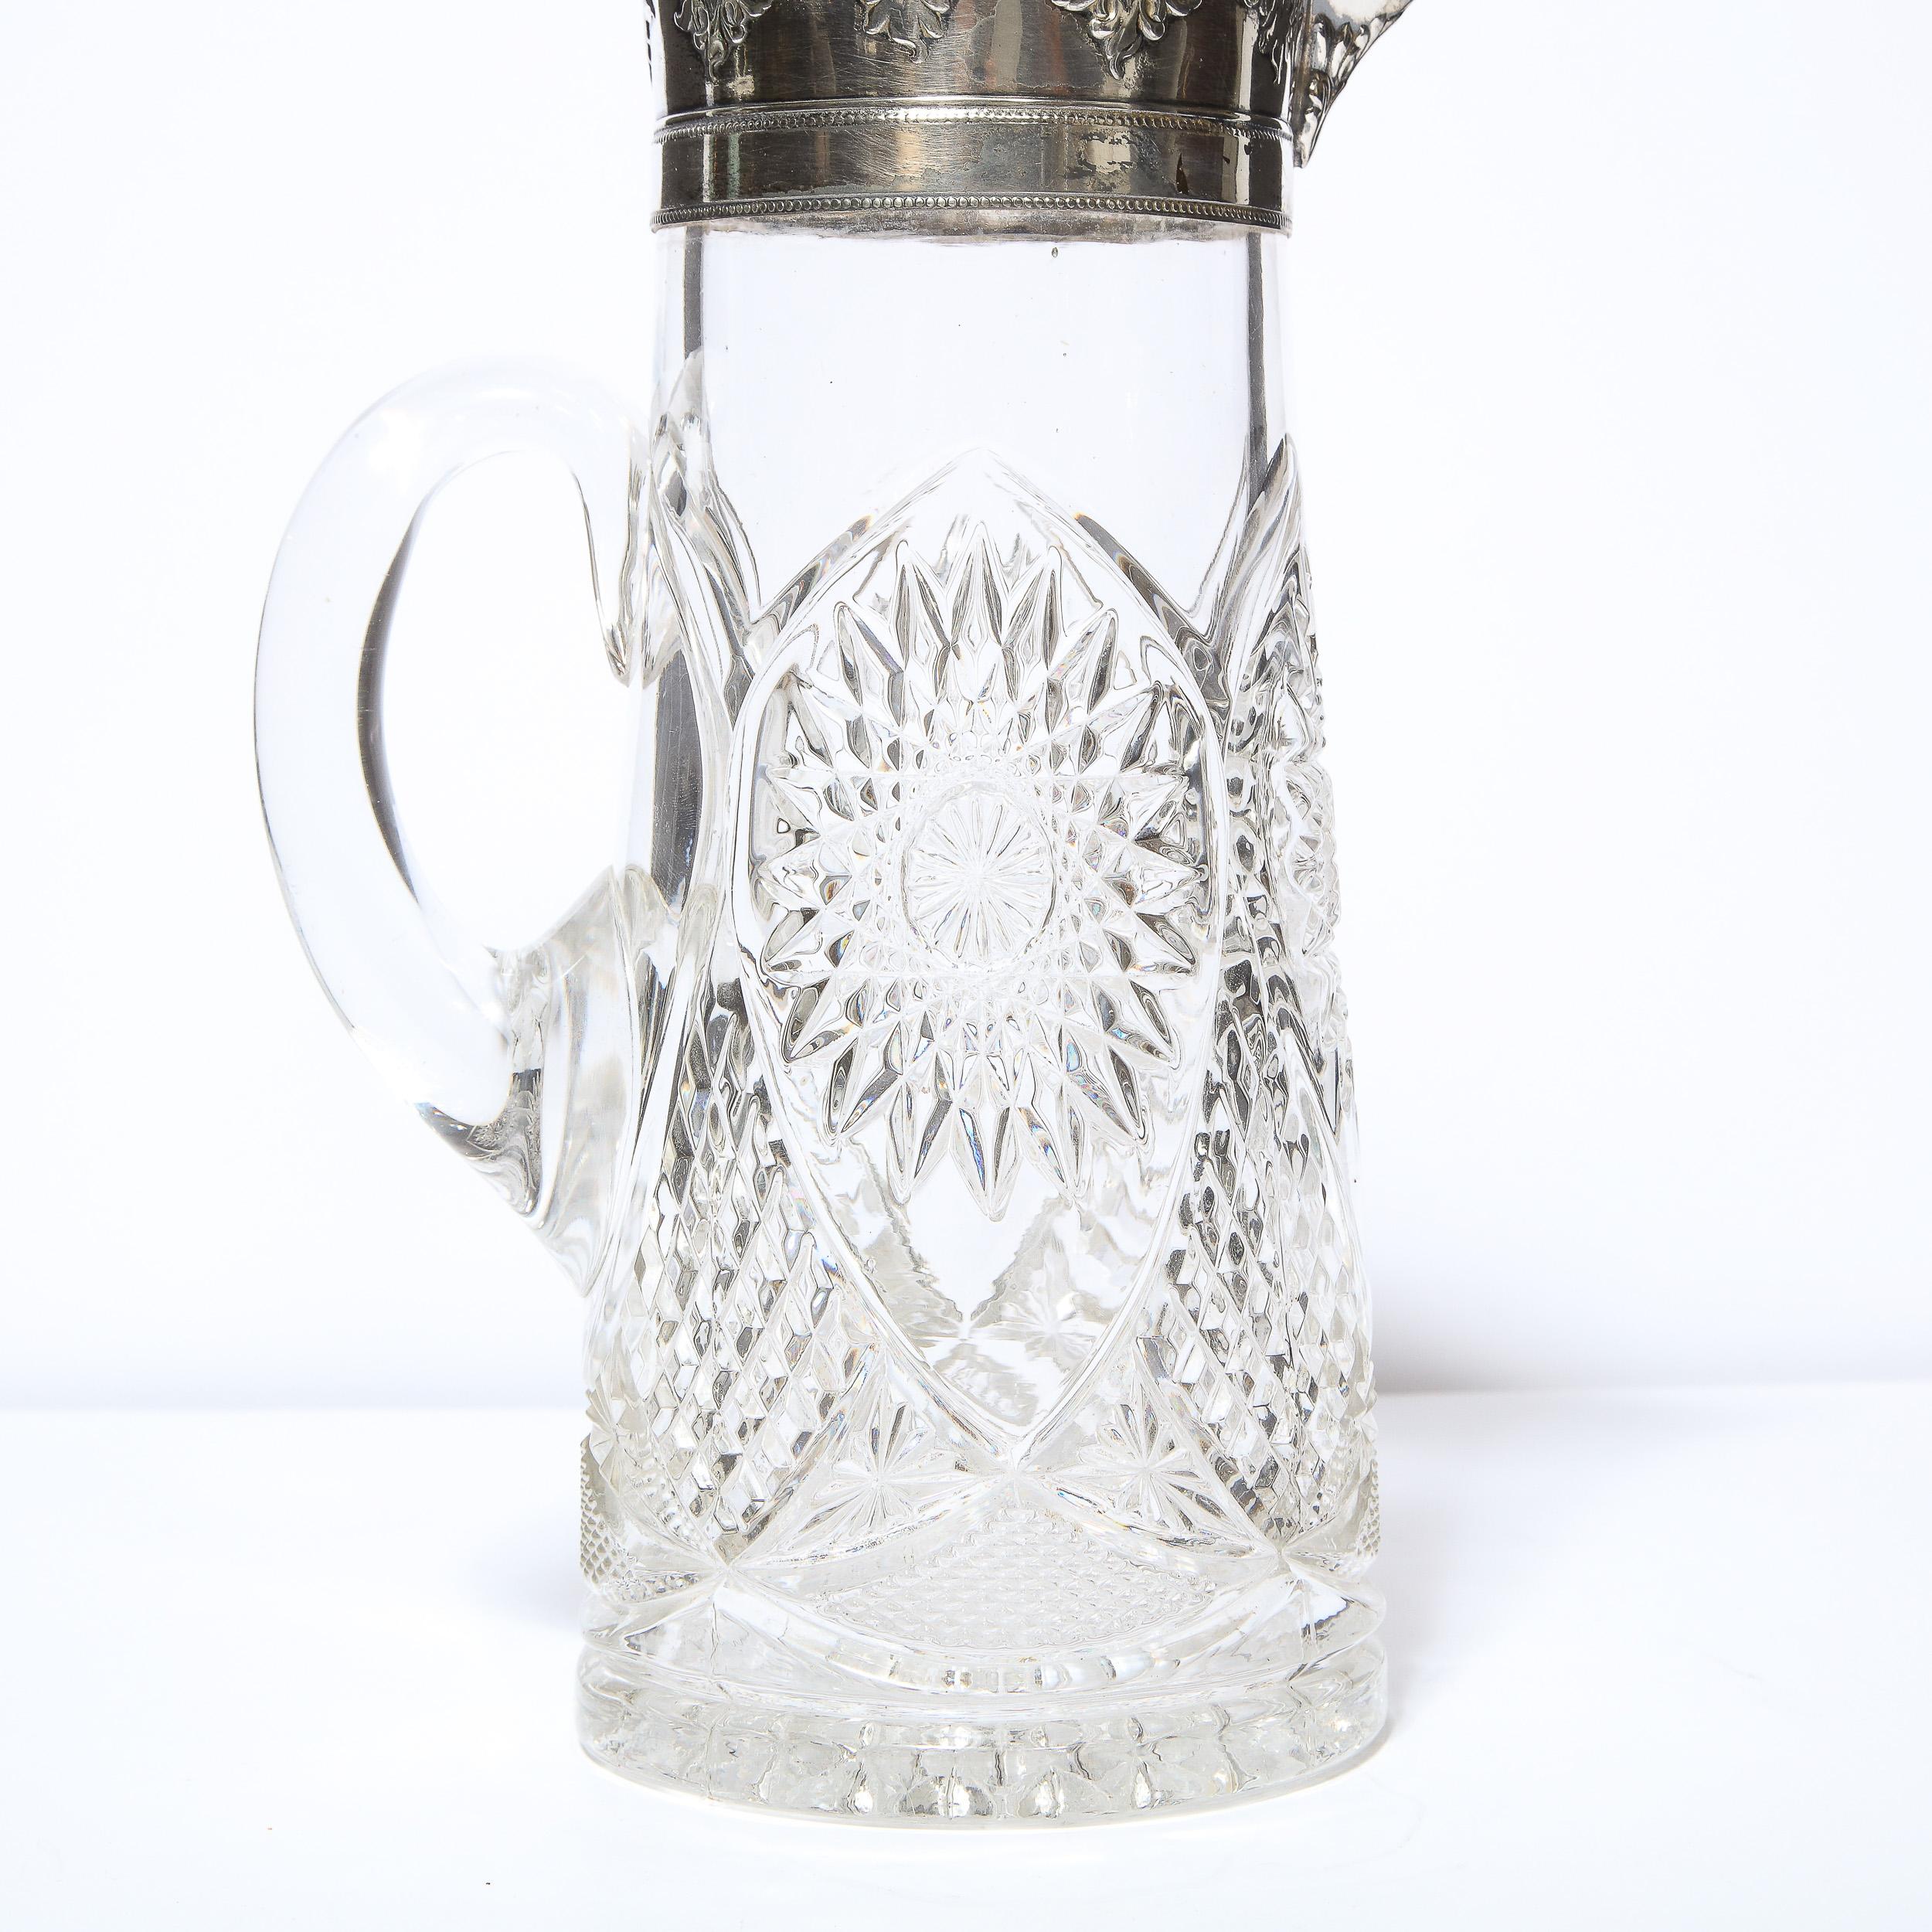 This elegant 1940s Art Deco pitcher was realized in the United States circa 1940. It features a slightly tapered cylindrical body with a streamlined handle and silver plated top. There are geometric designs including arches, diamond and sunburst